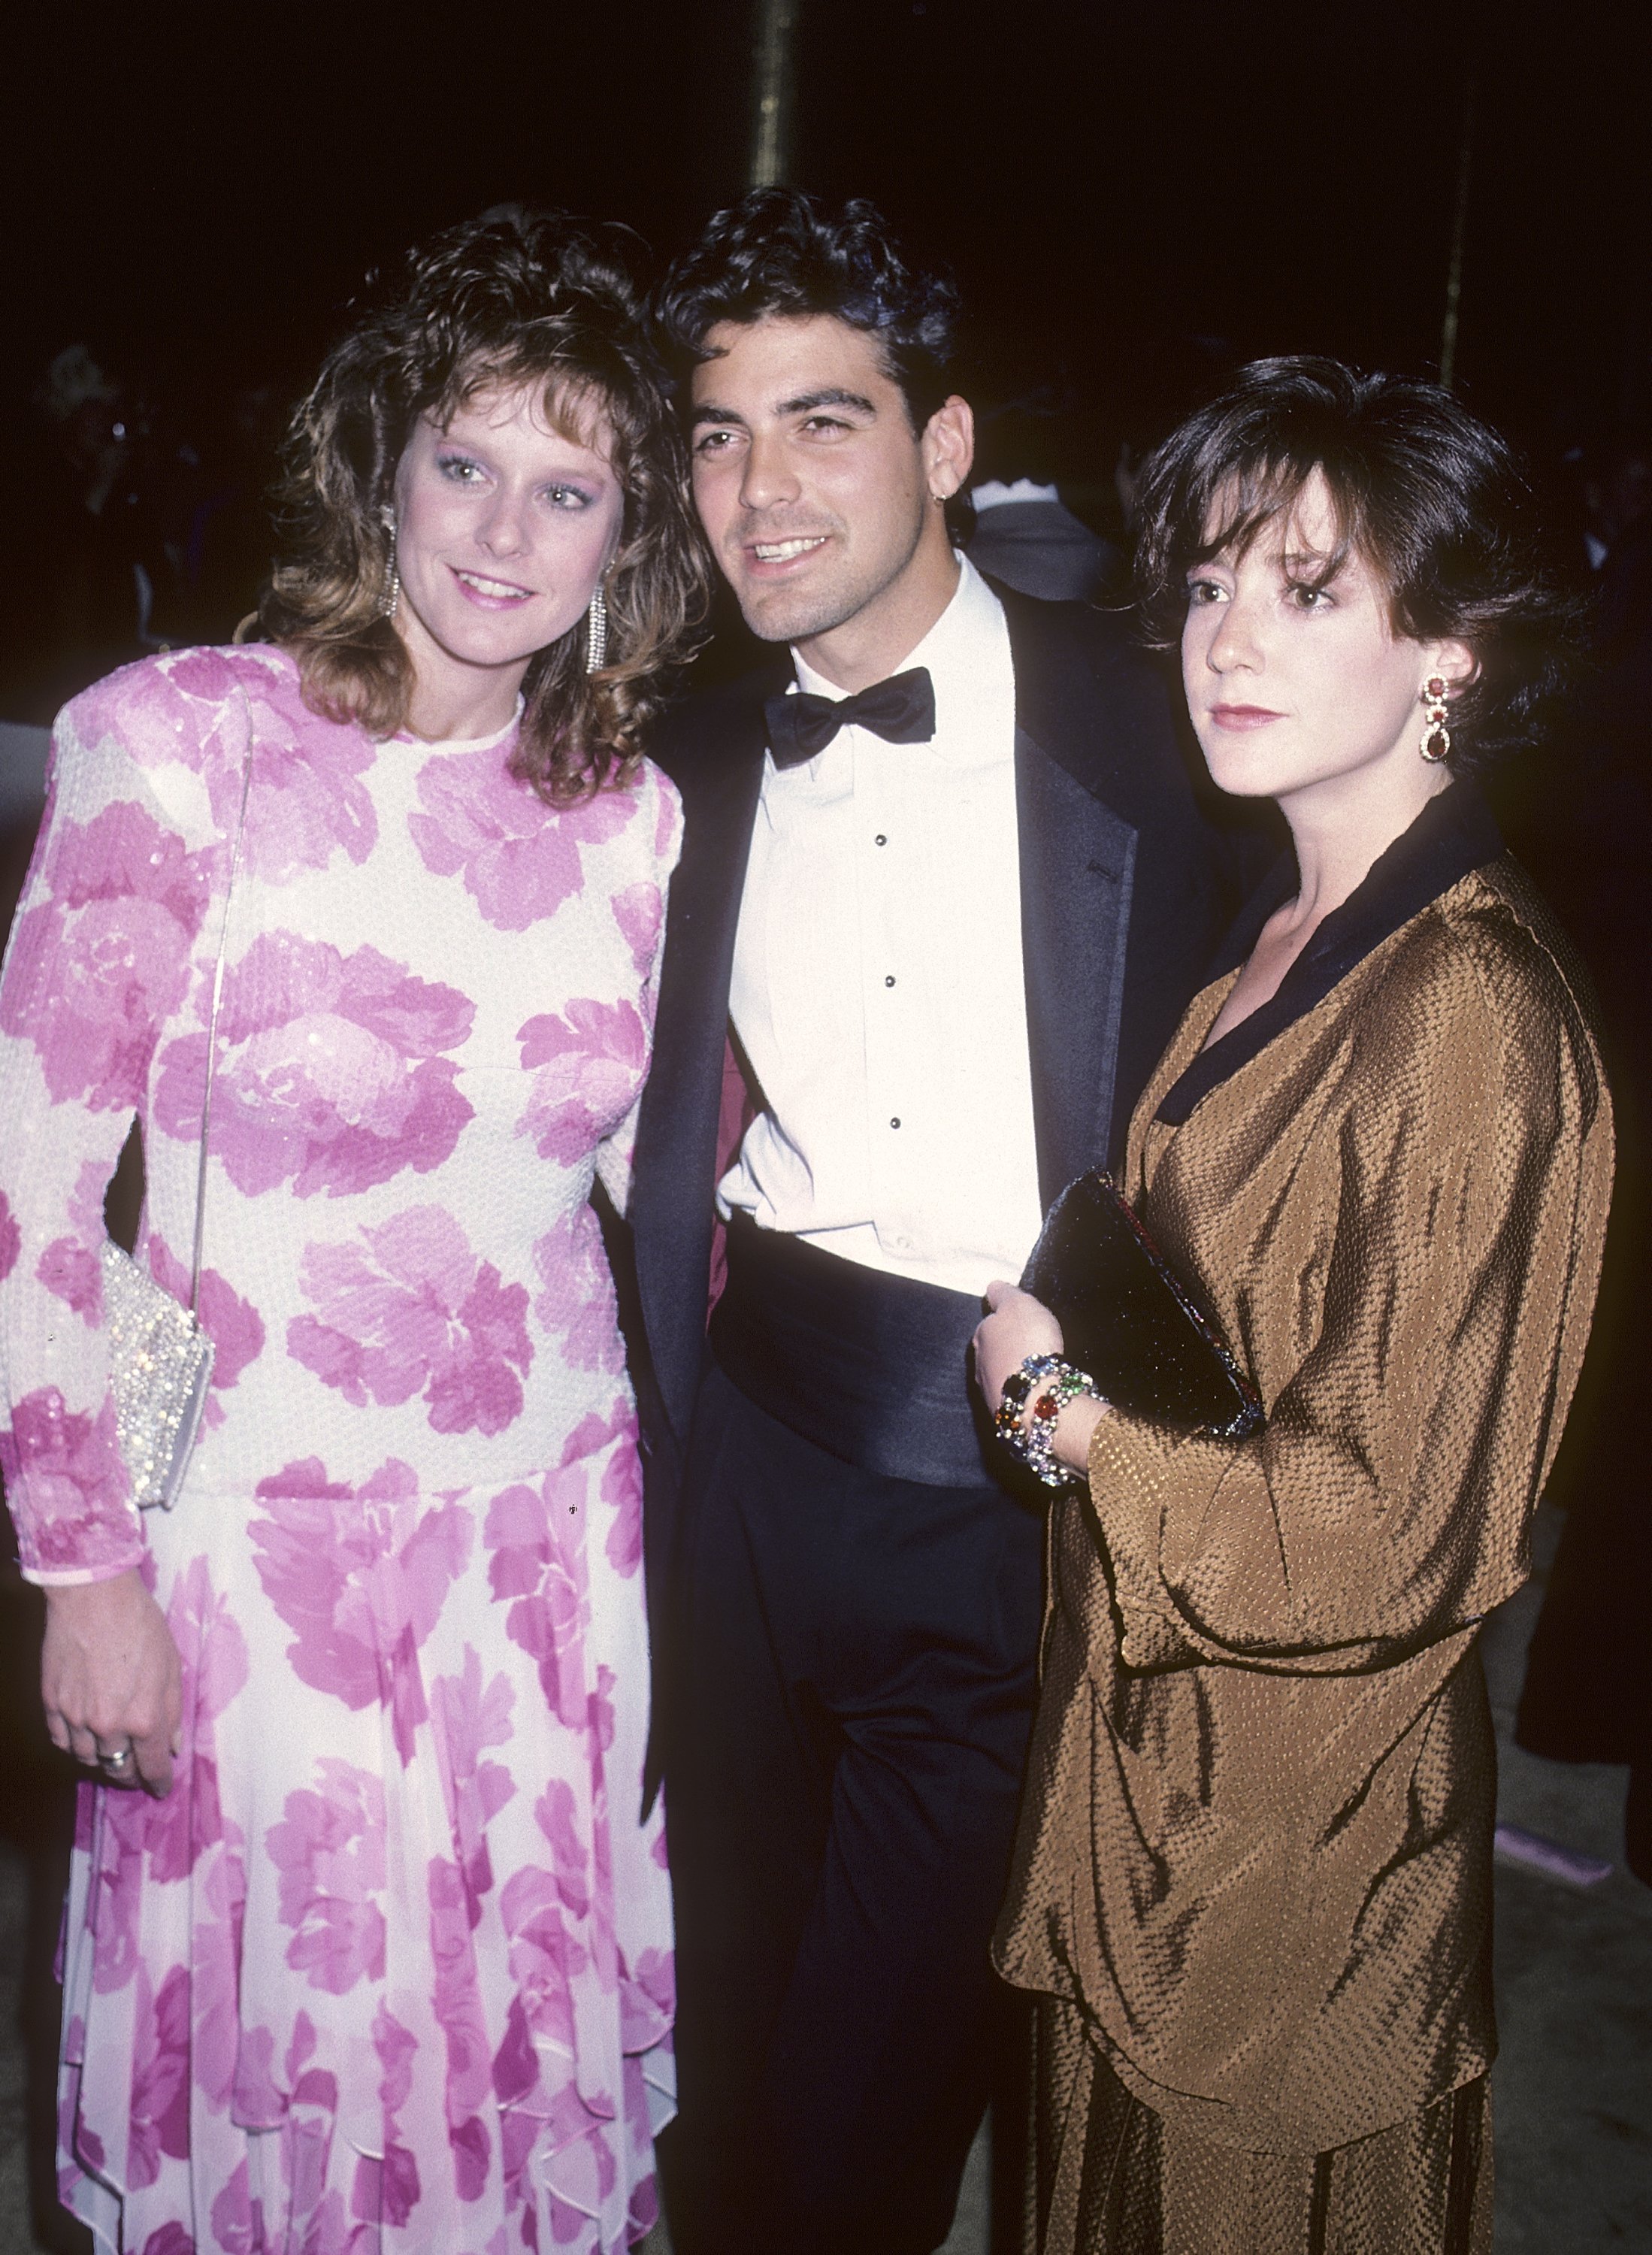 Actress Mary Beth McDonough with George Clooney and girlfriend Talia Balsam attending the First Annual Singers' Salute to the Songwriter at Dorothy Chandler Pavilion, Music Center on April 7, 1986 in Los Angeles, California. / Source: Getty Images